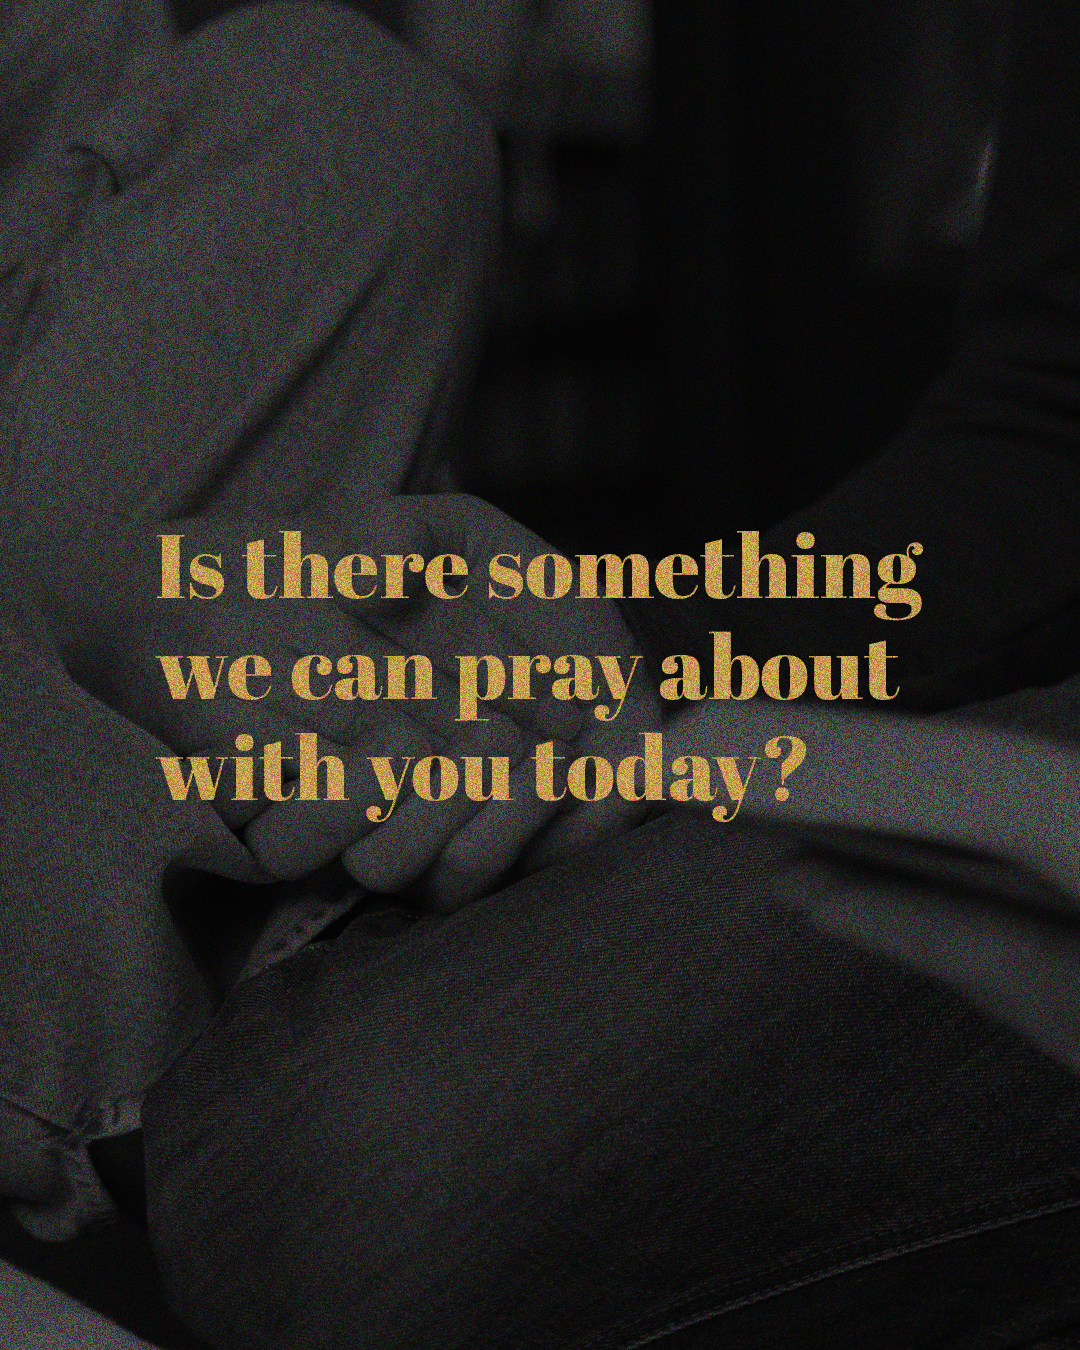 Is there something we can pray about with you today?